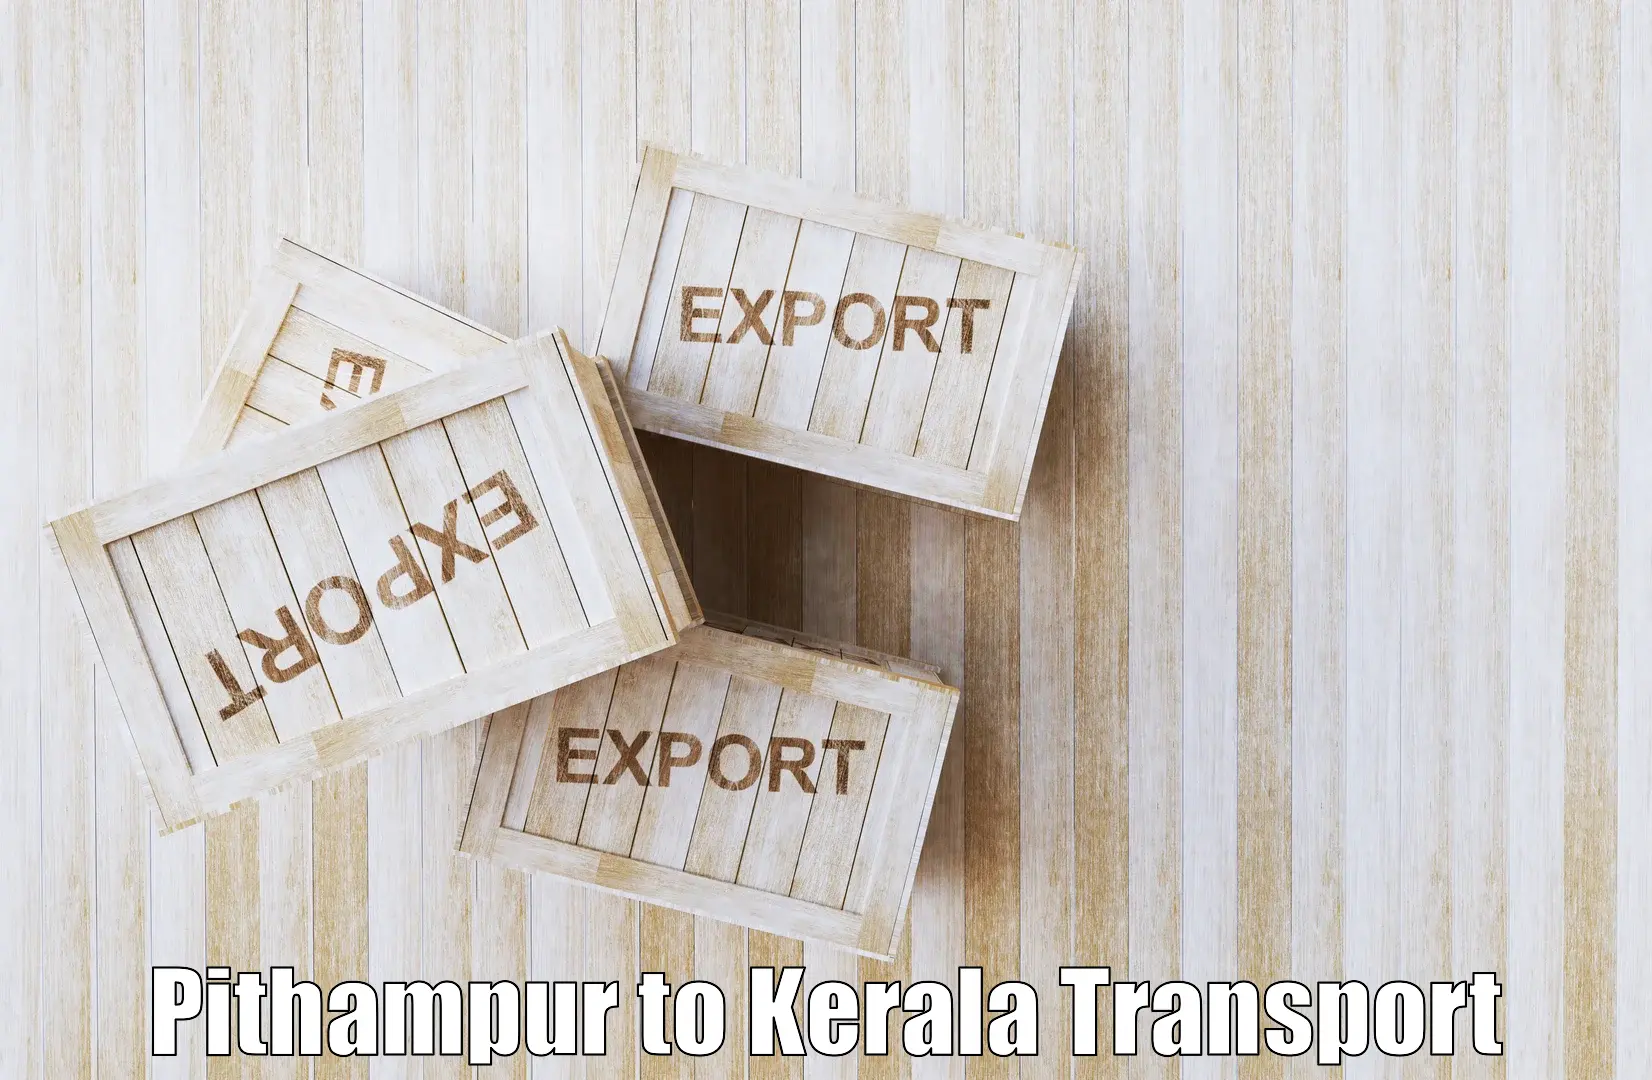 Transport shared services Pithampur to Kollam